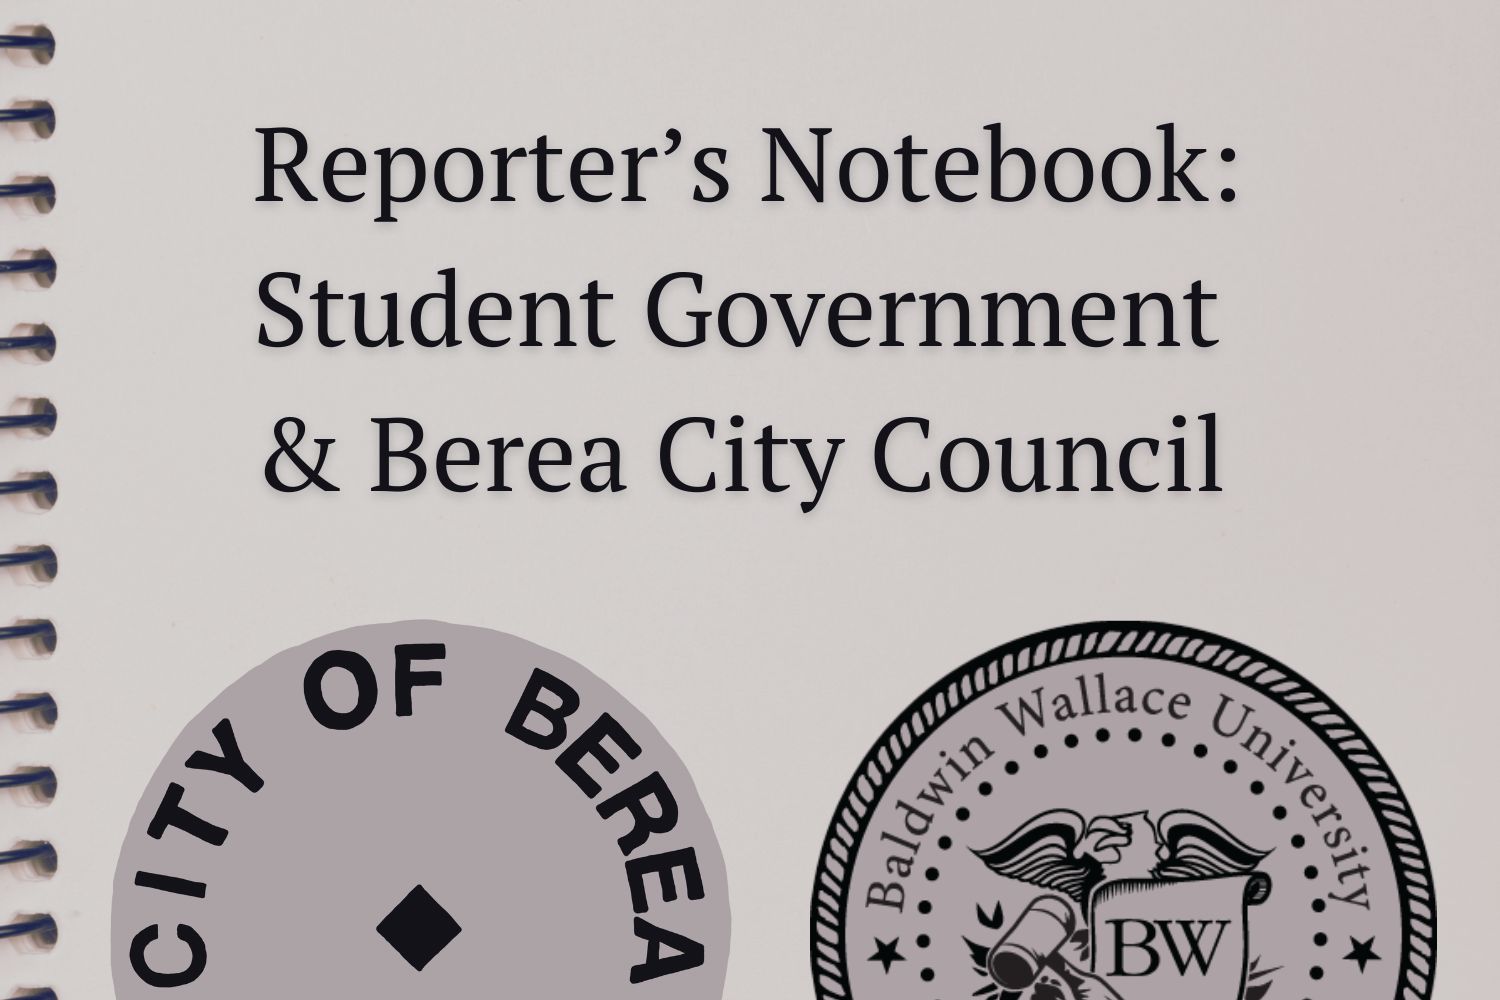 Reporters Notebook: Student Government & Berea City Council 